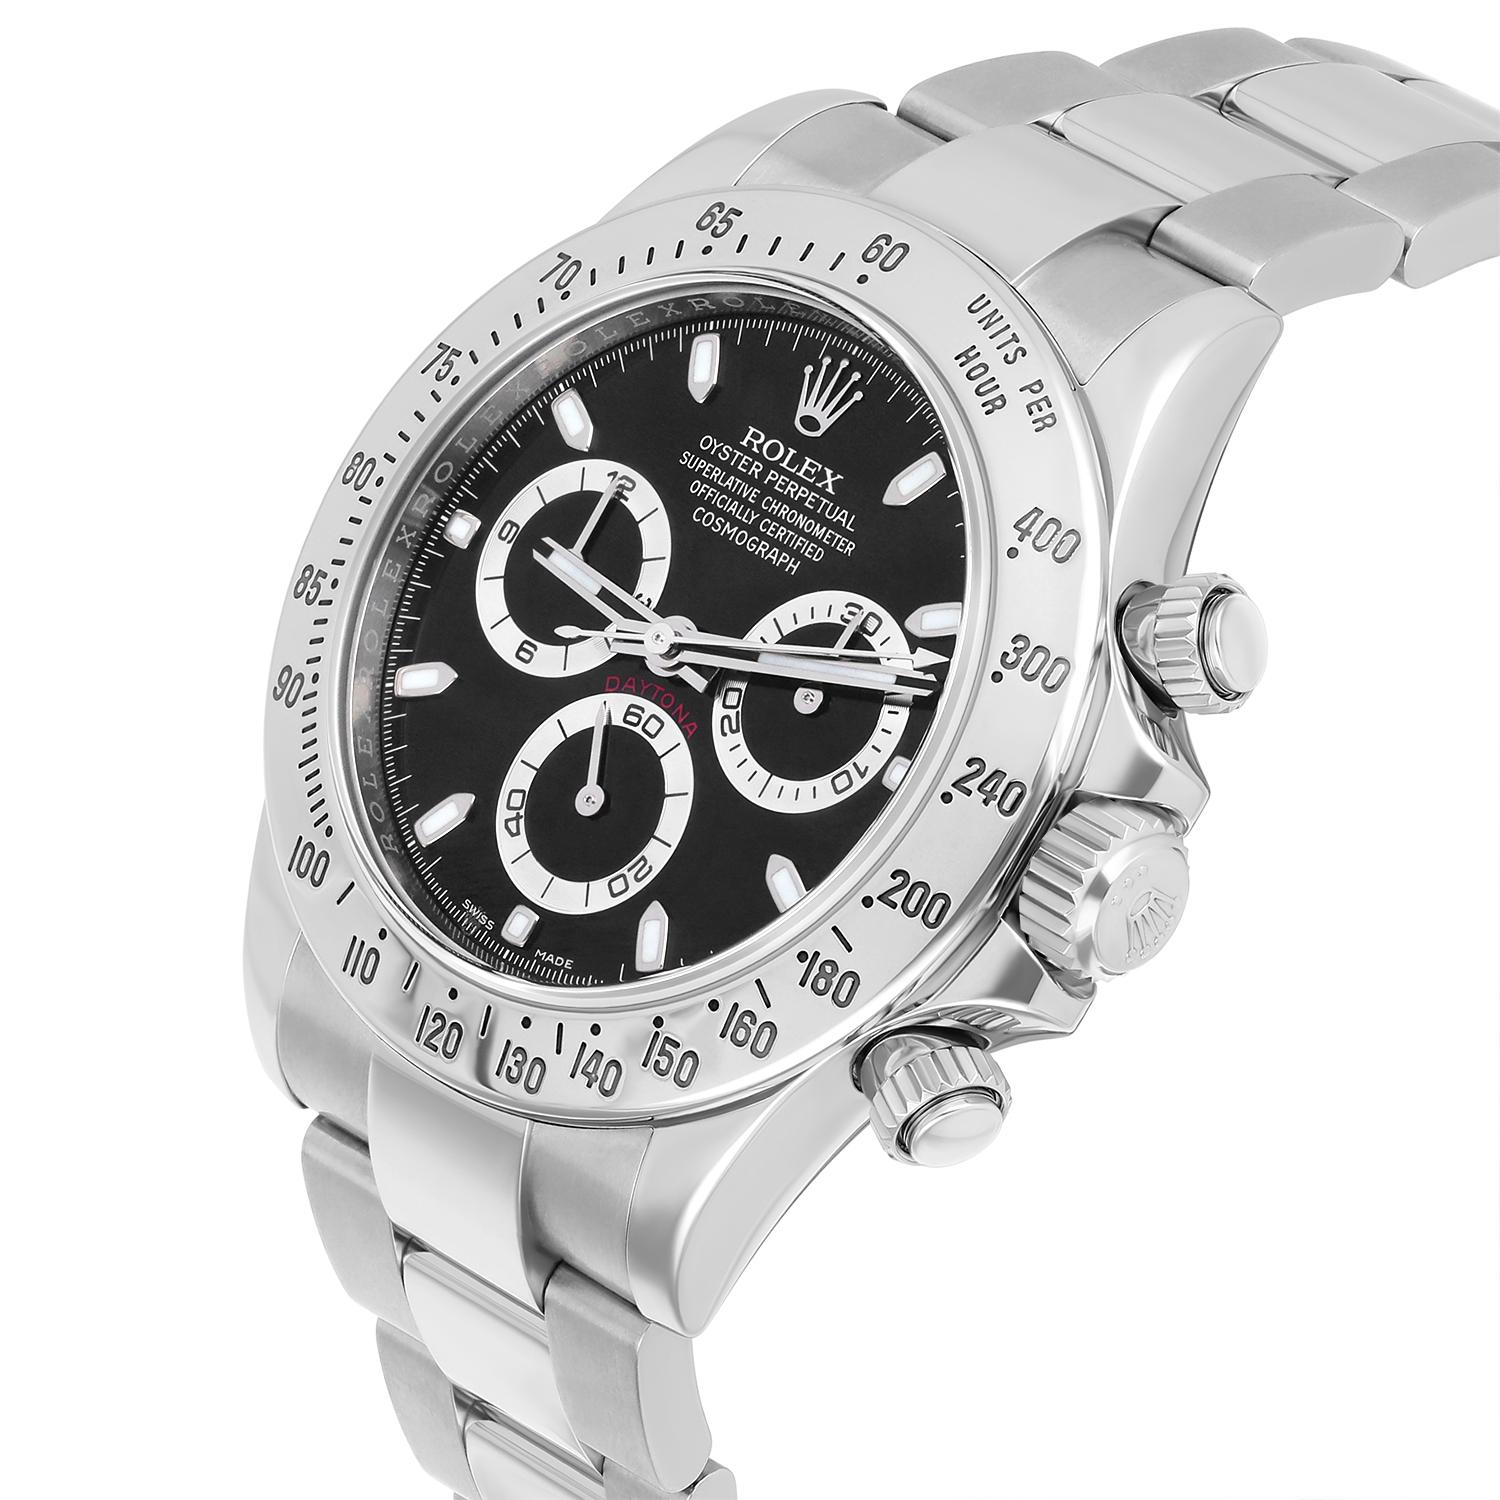 Rolex Cosmograph Daytona Stainless Steel 40mm Black Men's Watch 116520 For Sale 3